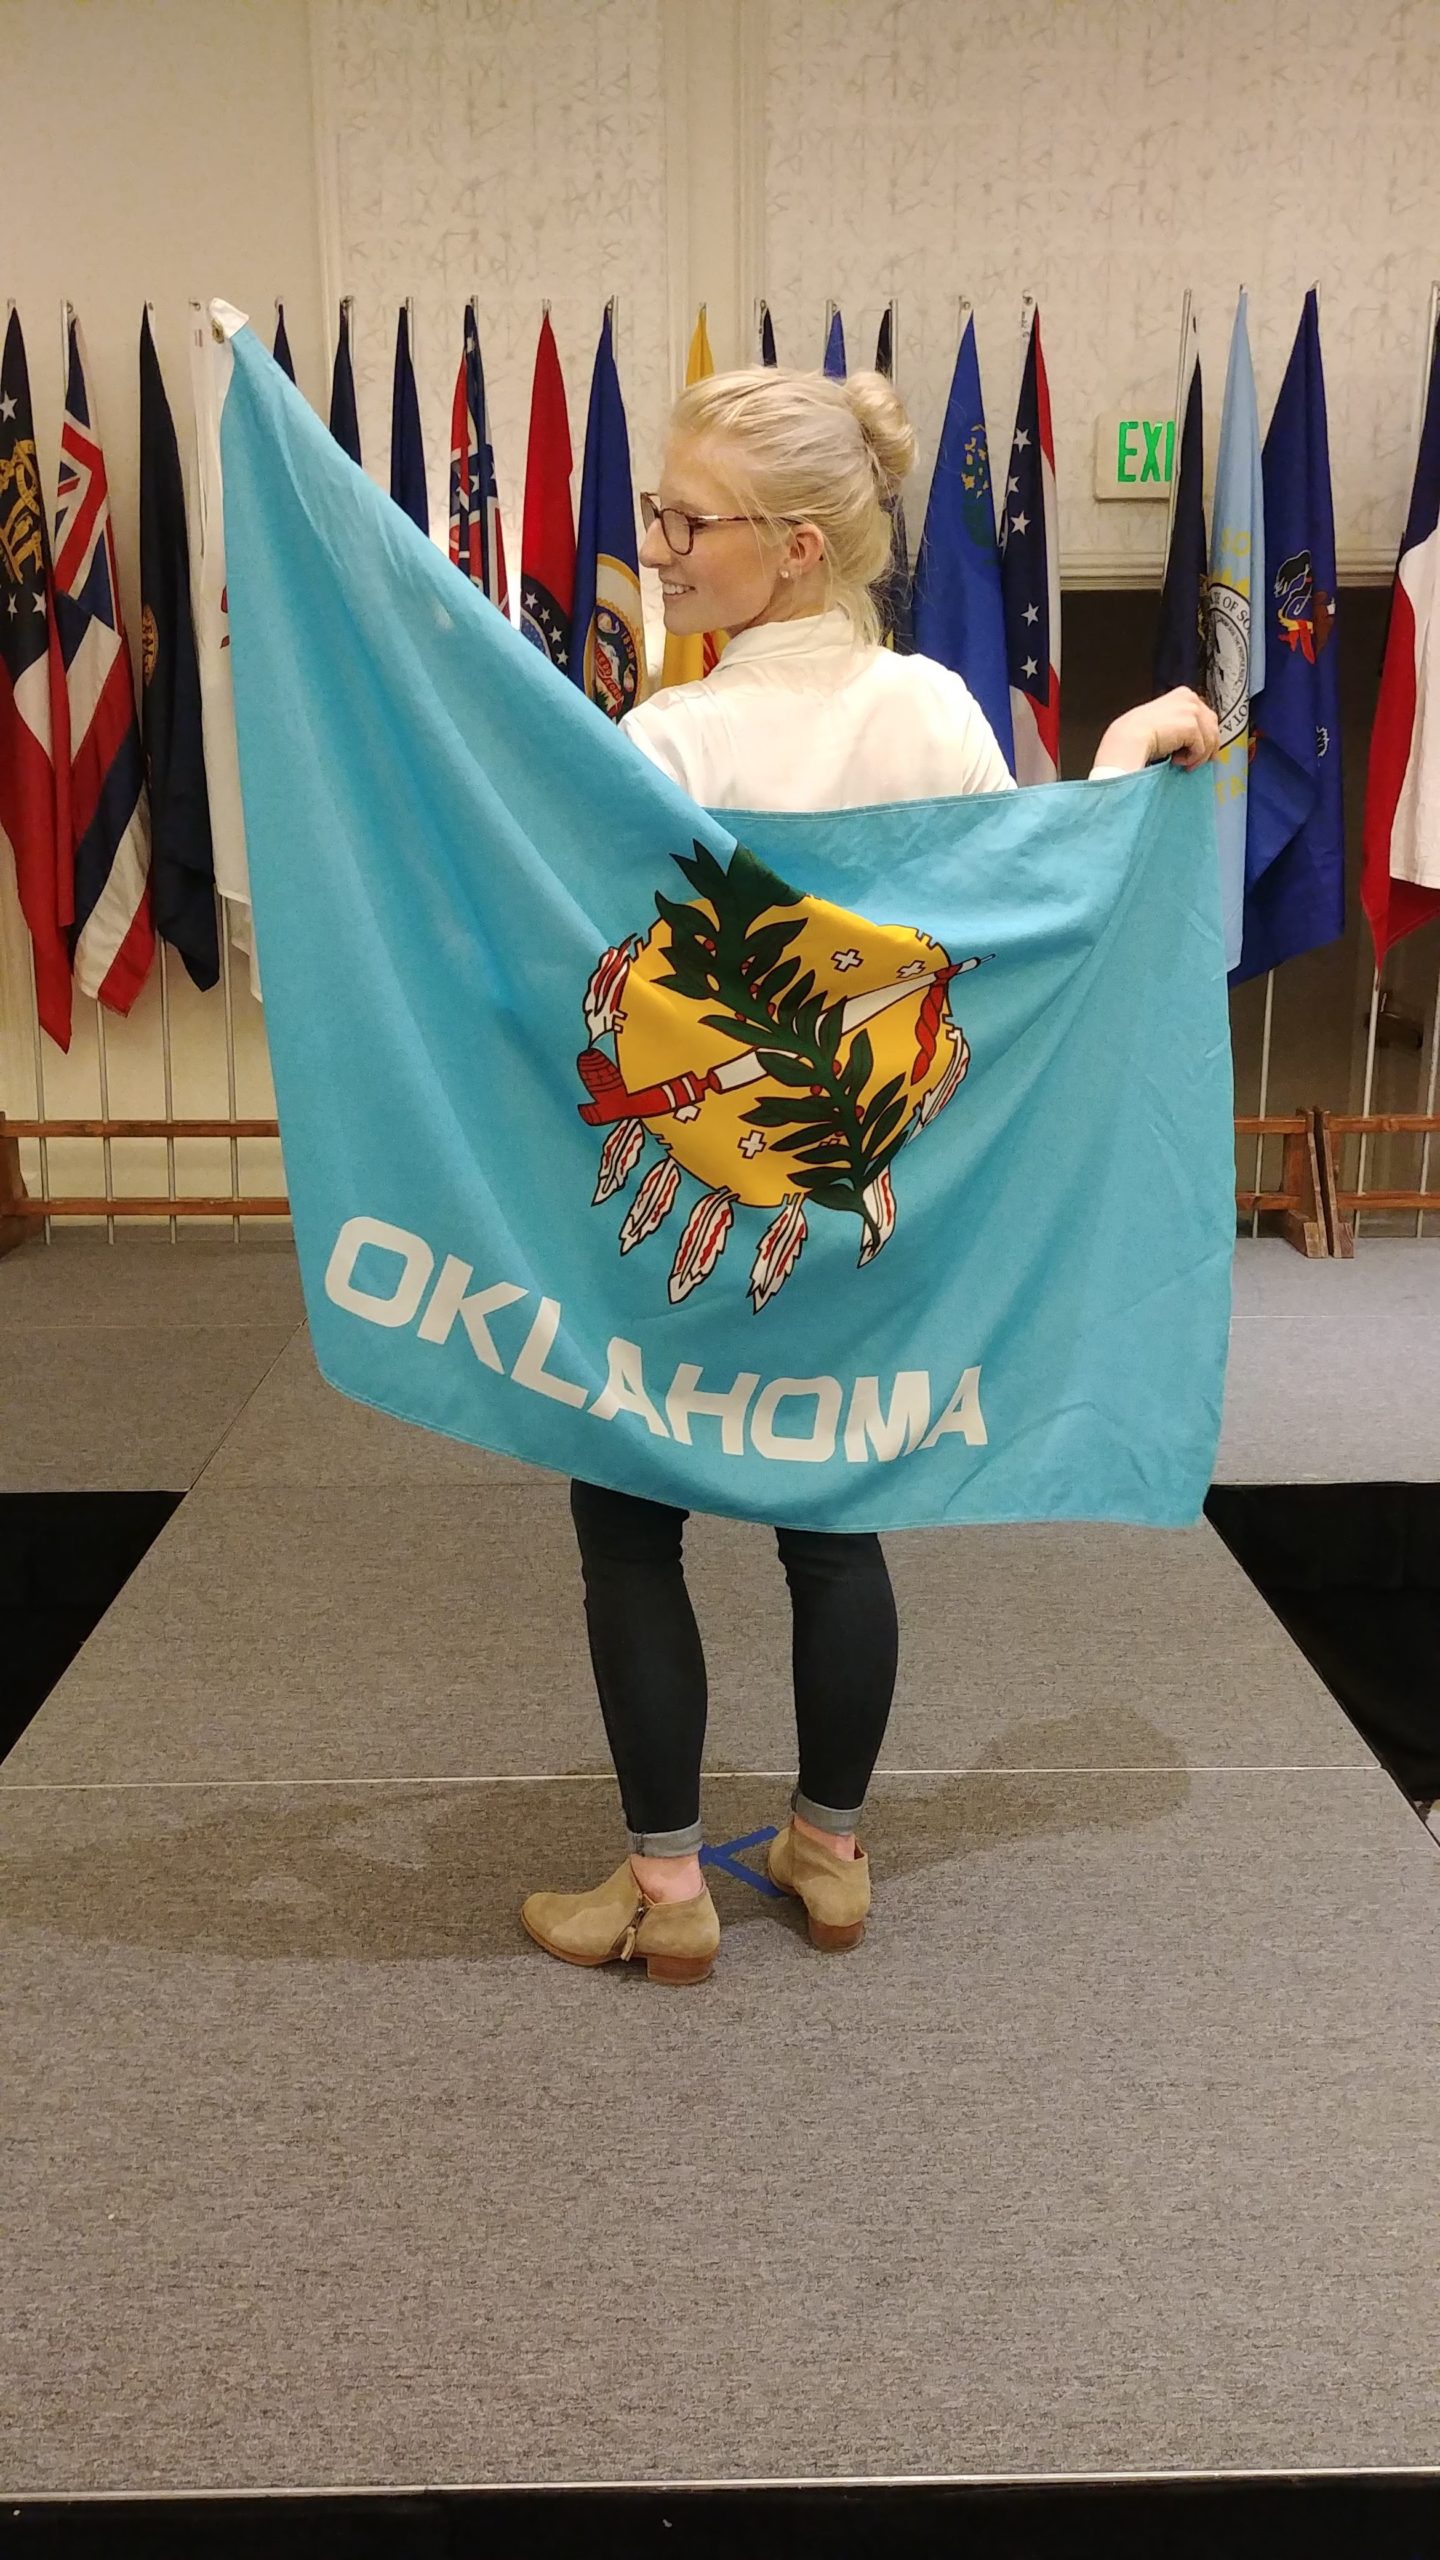 I was born and raised in Oklahoma!